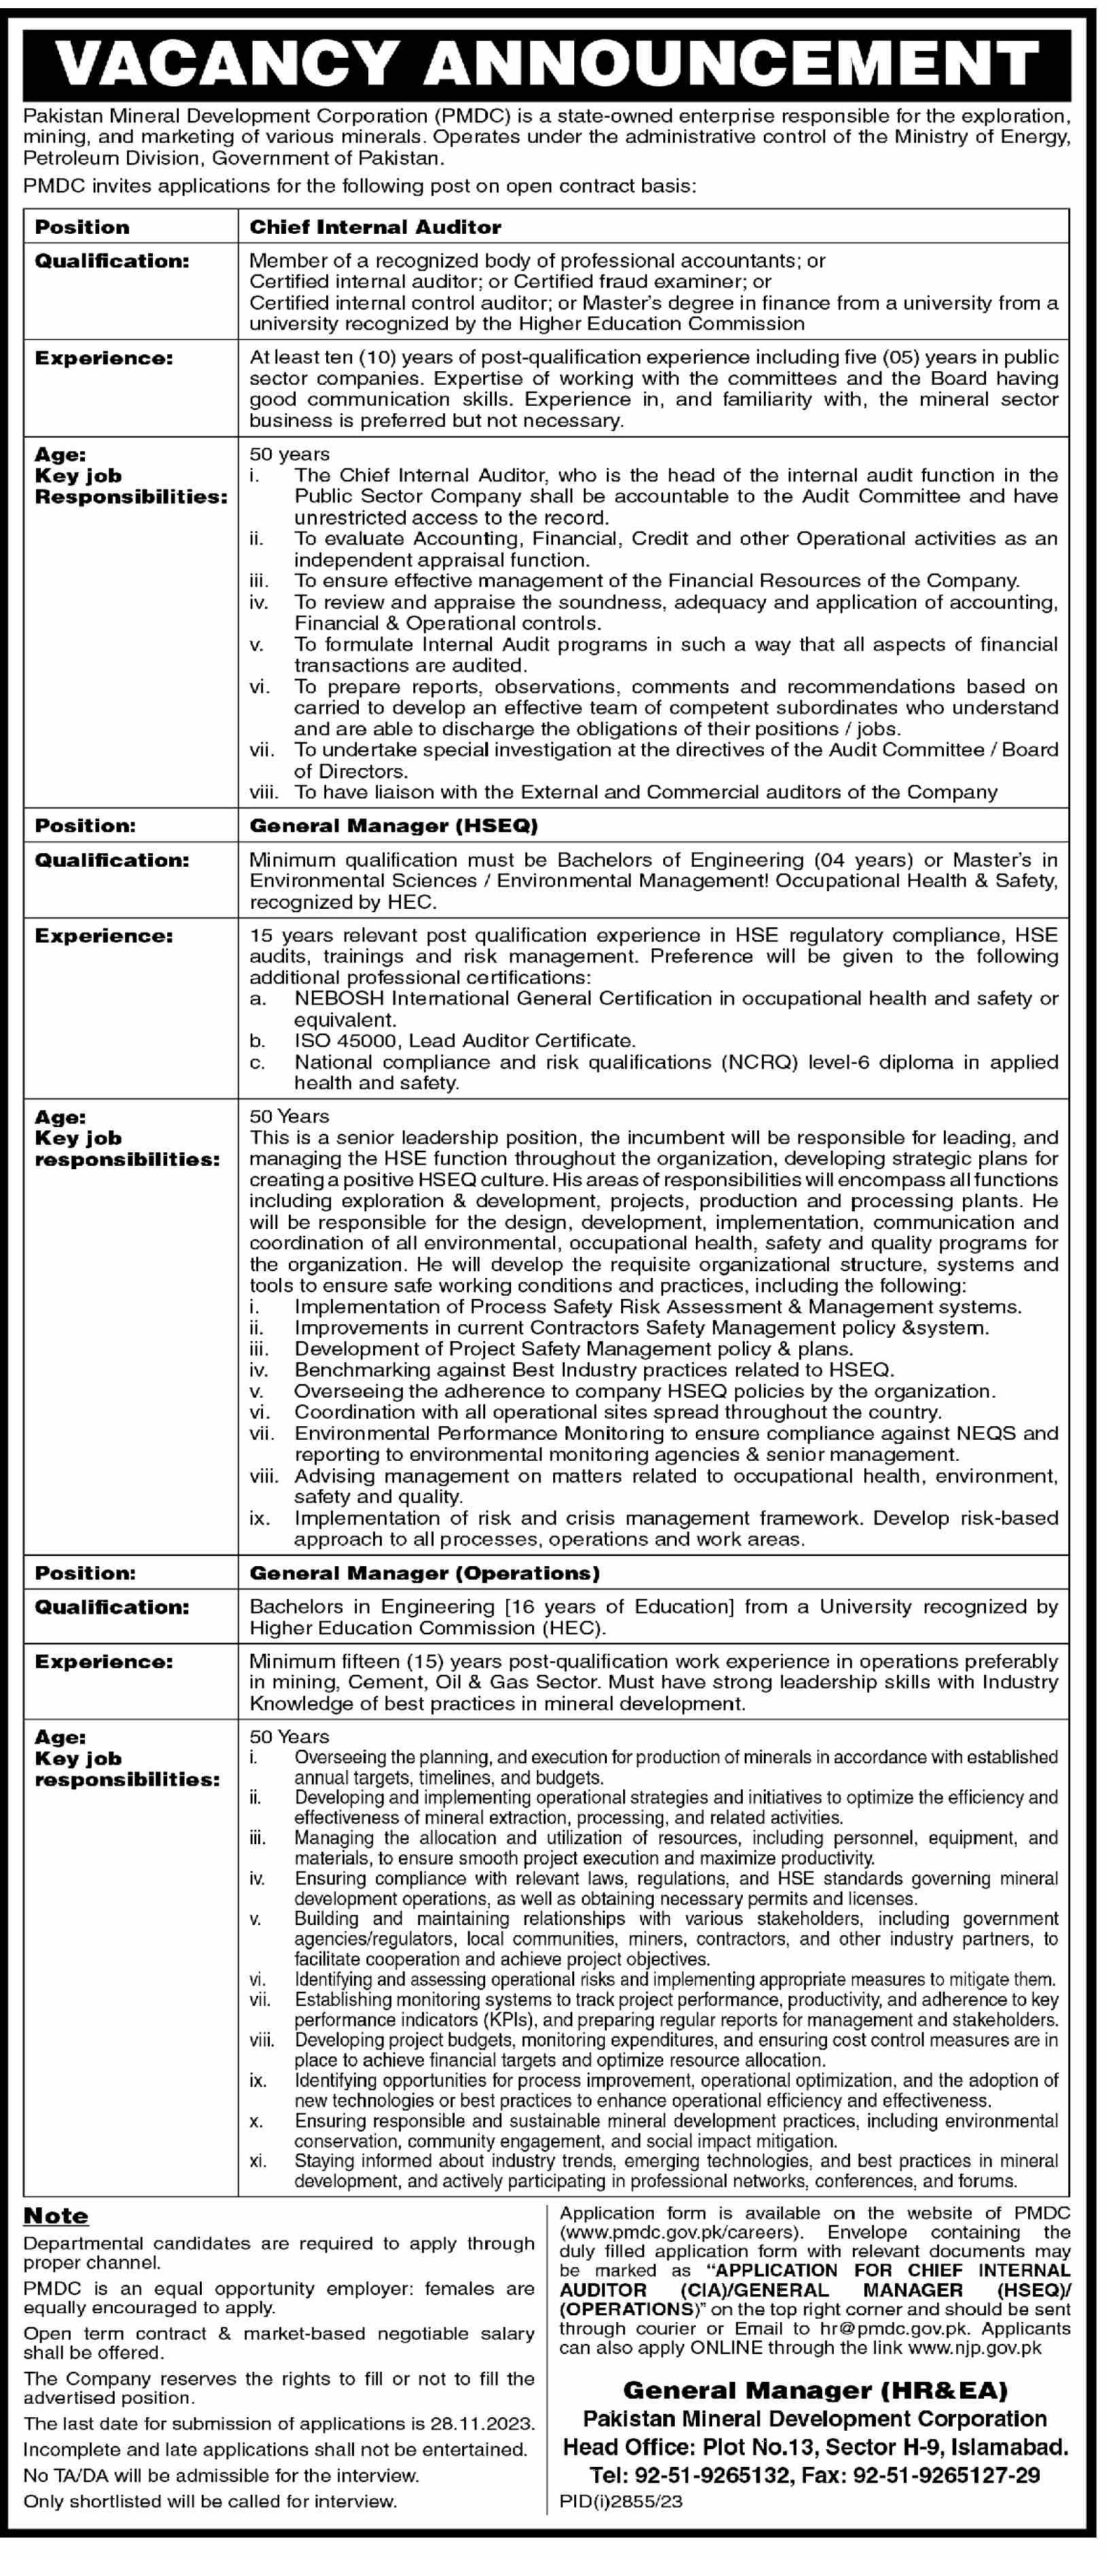 Pakistan Mineral Development Corporation Jobs in Ministry of Petroleum Division Government of Pakistan